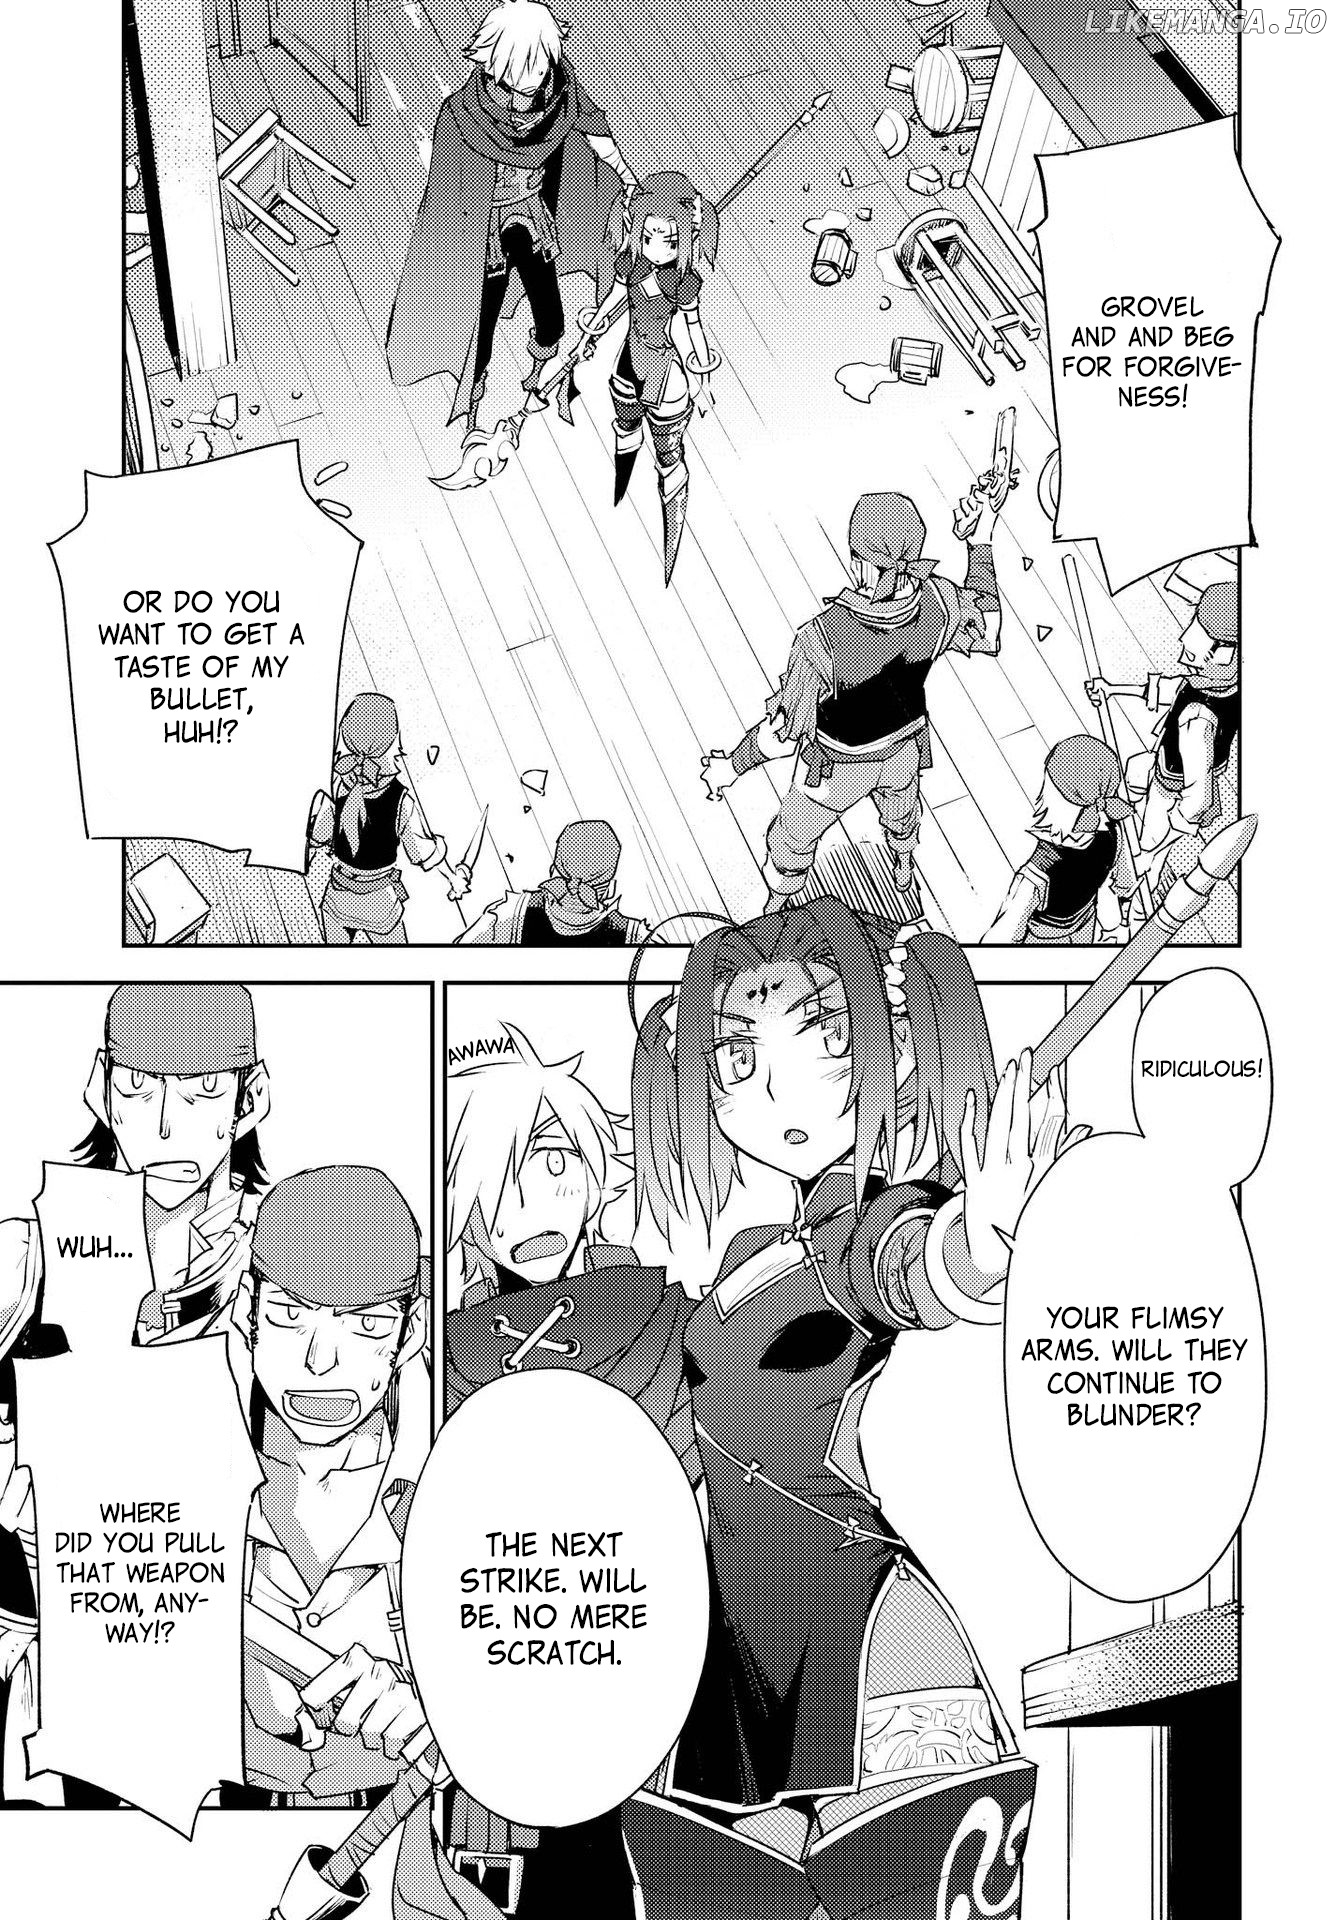 Fate/Grand Order: Epic of Remnant - Subspecies Singularity IV: Taboo Advent Salem: Salem of Heresy chapter 5 - page 21